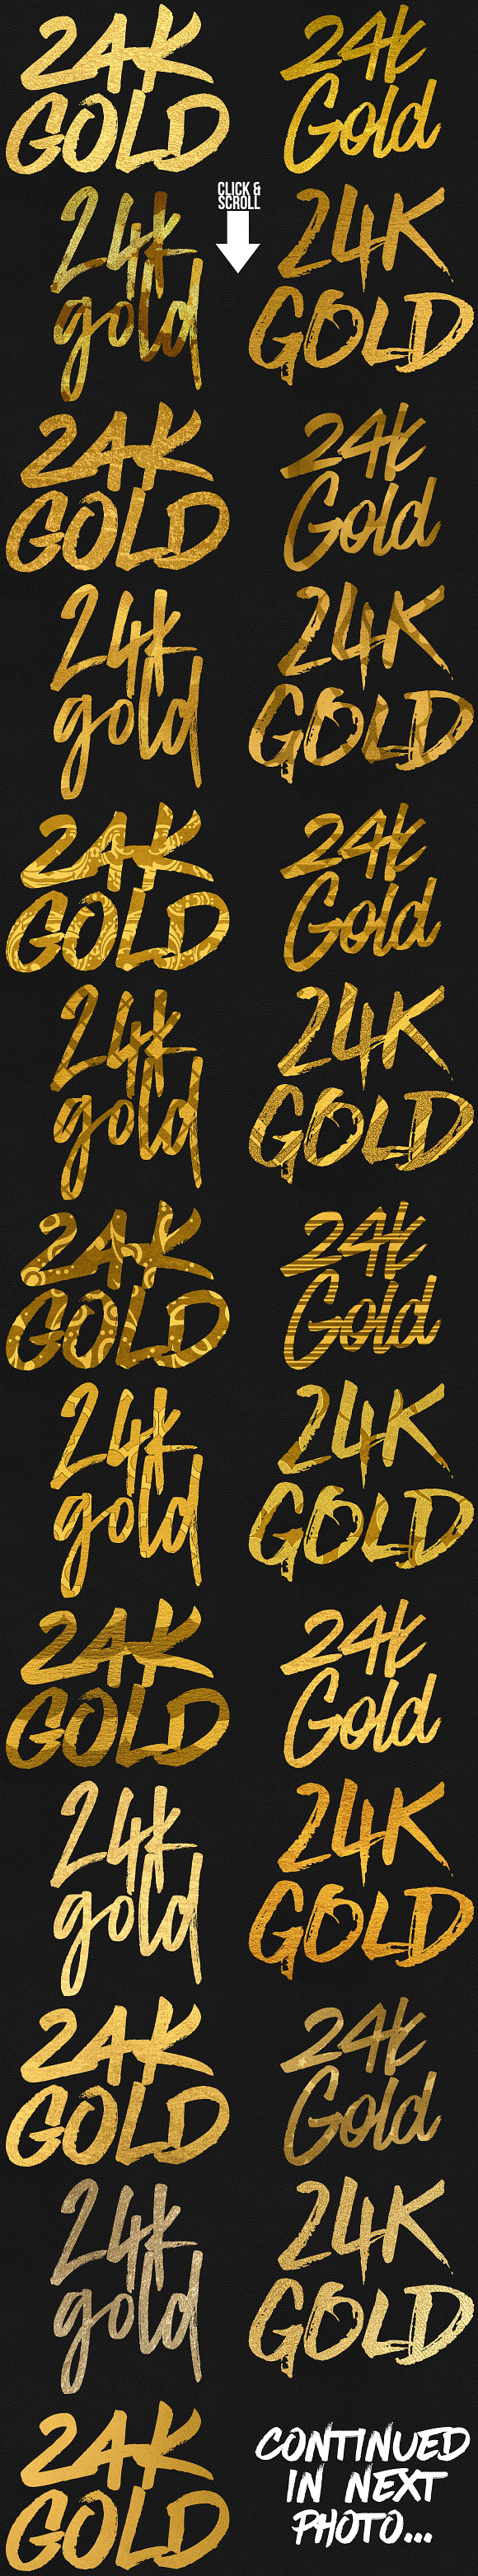 500 Gold Foil Layer Styles Photoshop in Photoshop Layer Styles - product preview 2